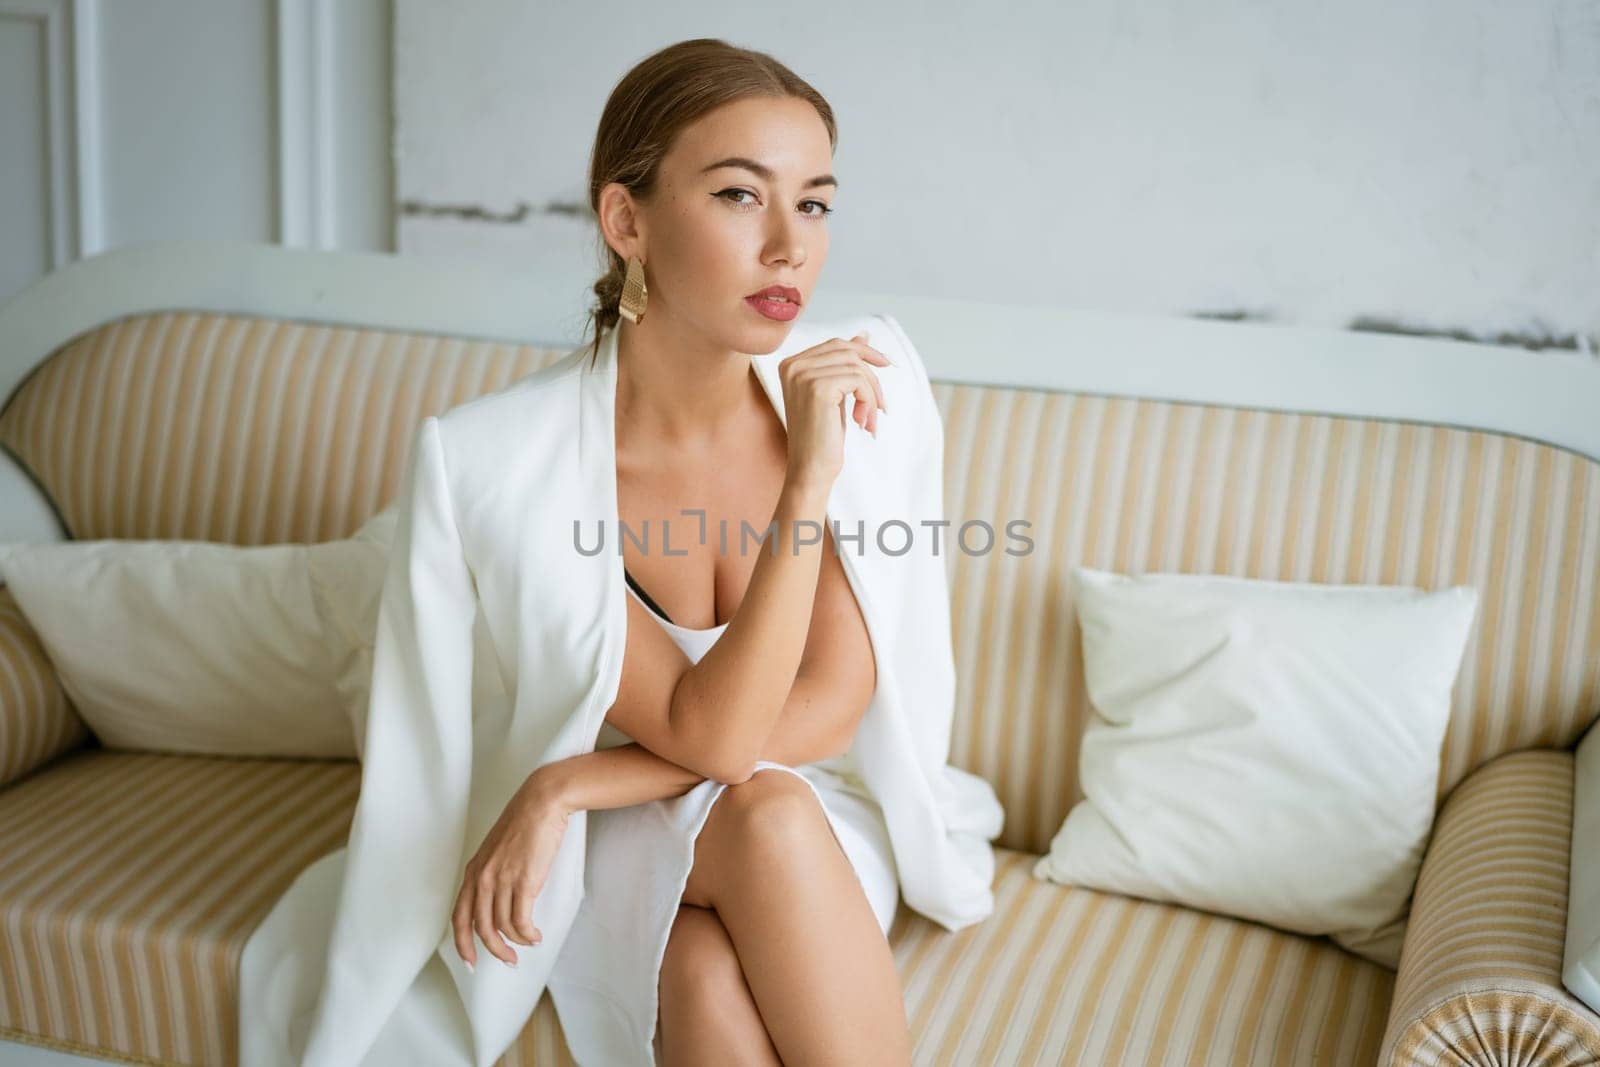 Young business woman of Caucasian ethnicity is sitting on the sofa in white business clothes with beautiful makeup and hair. Portrait of a confident beautiful girl